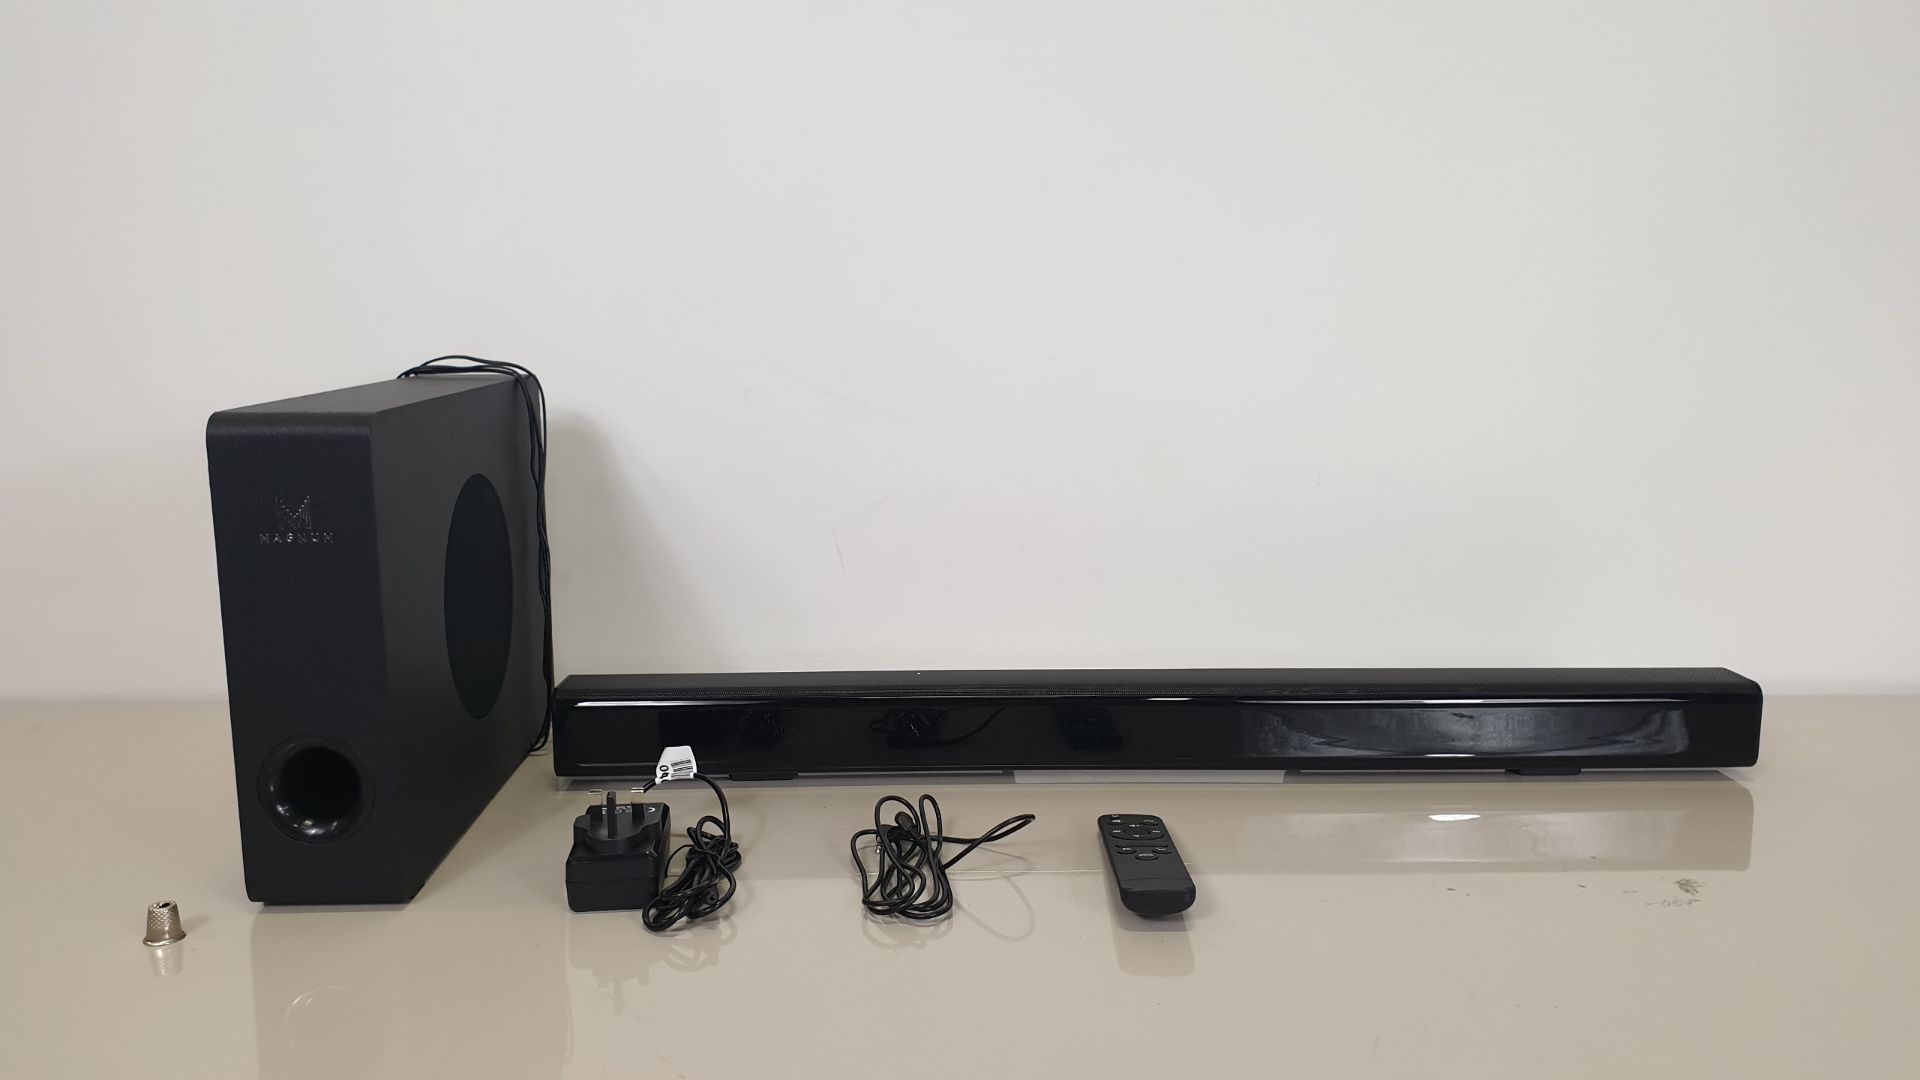 BRAND NEW BOXED MAGNUM POWERFUL SOUNDBAR AND SUBWOOFER - REMOTE INCLUDED